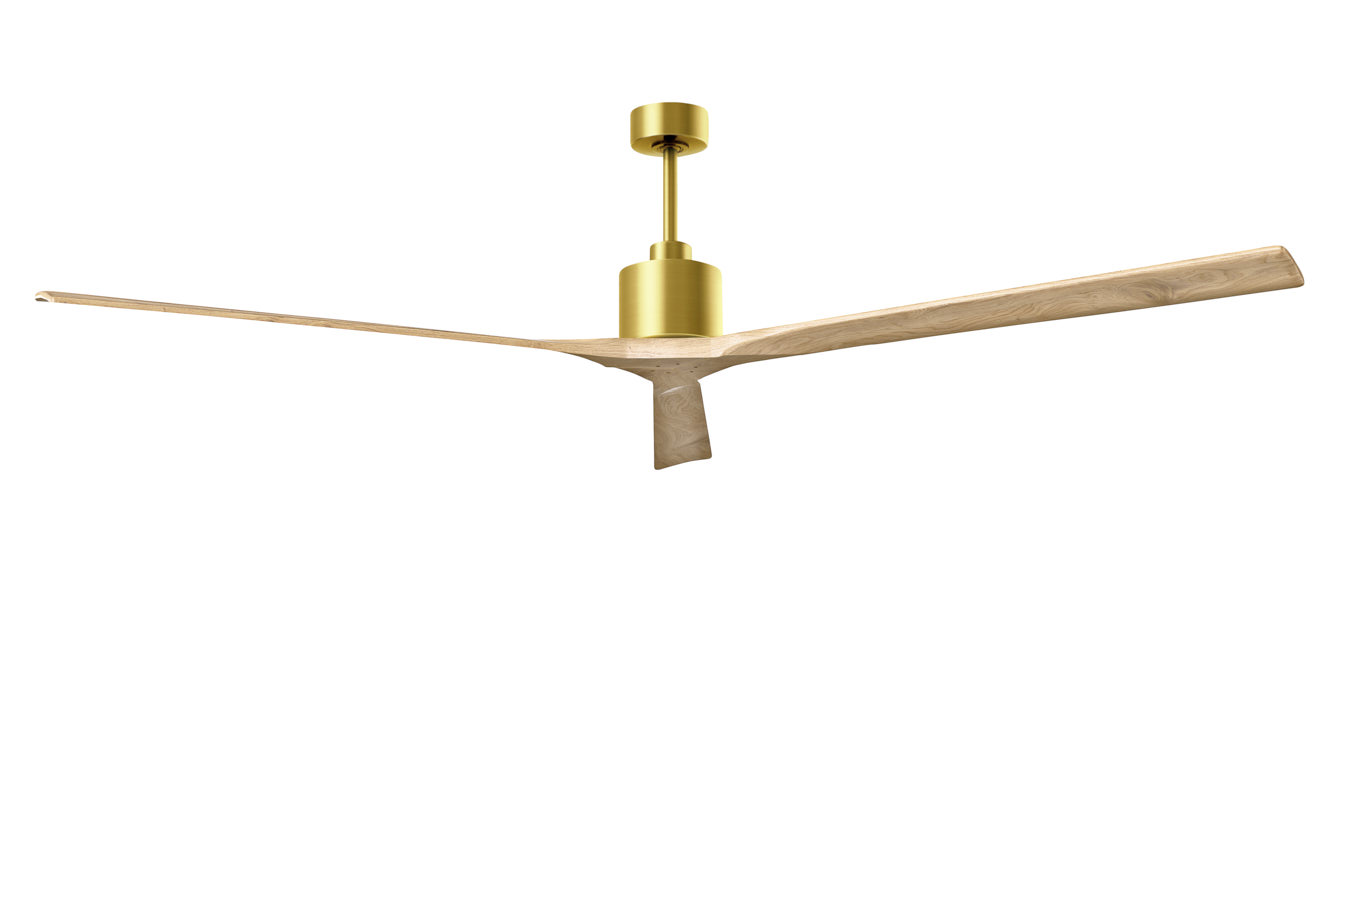 Nan XL ceiling fan in Brushed Brass with 90” Light Maple blades